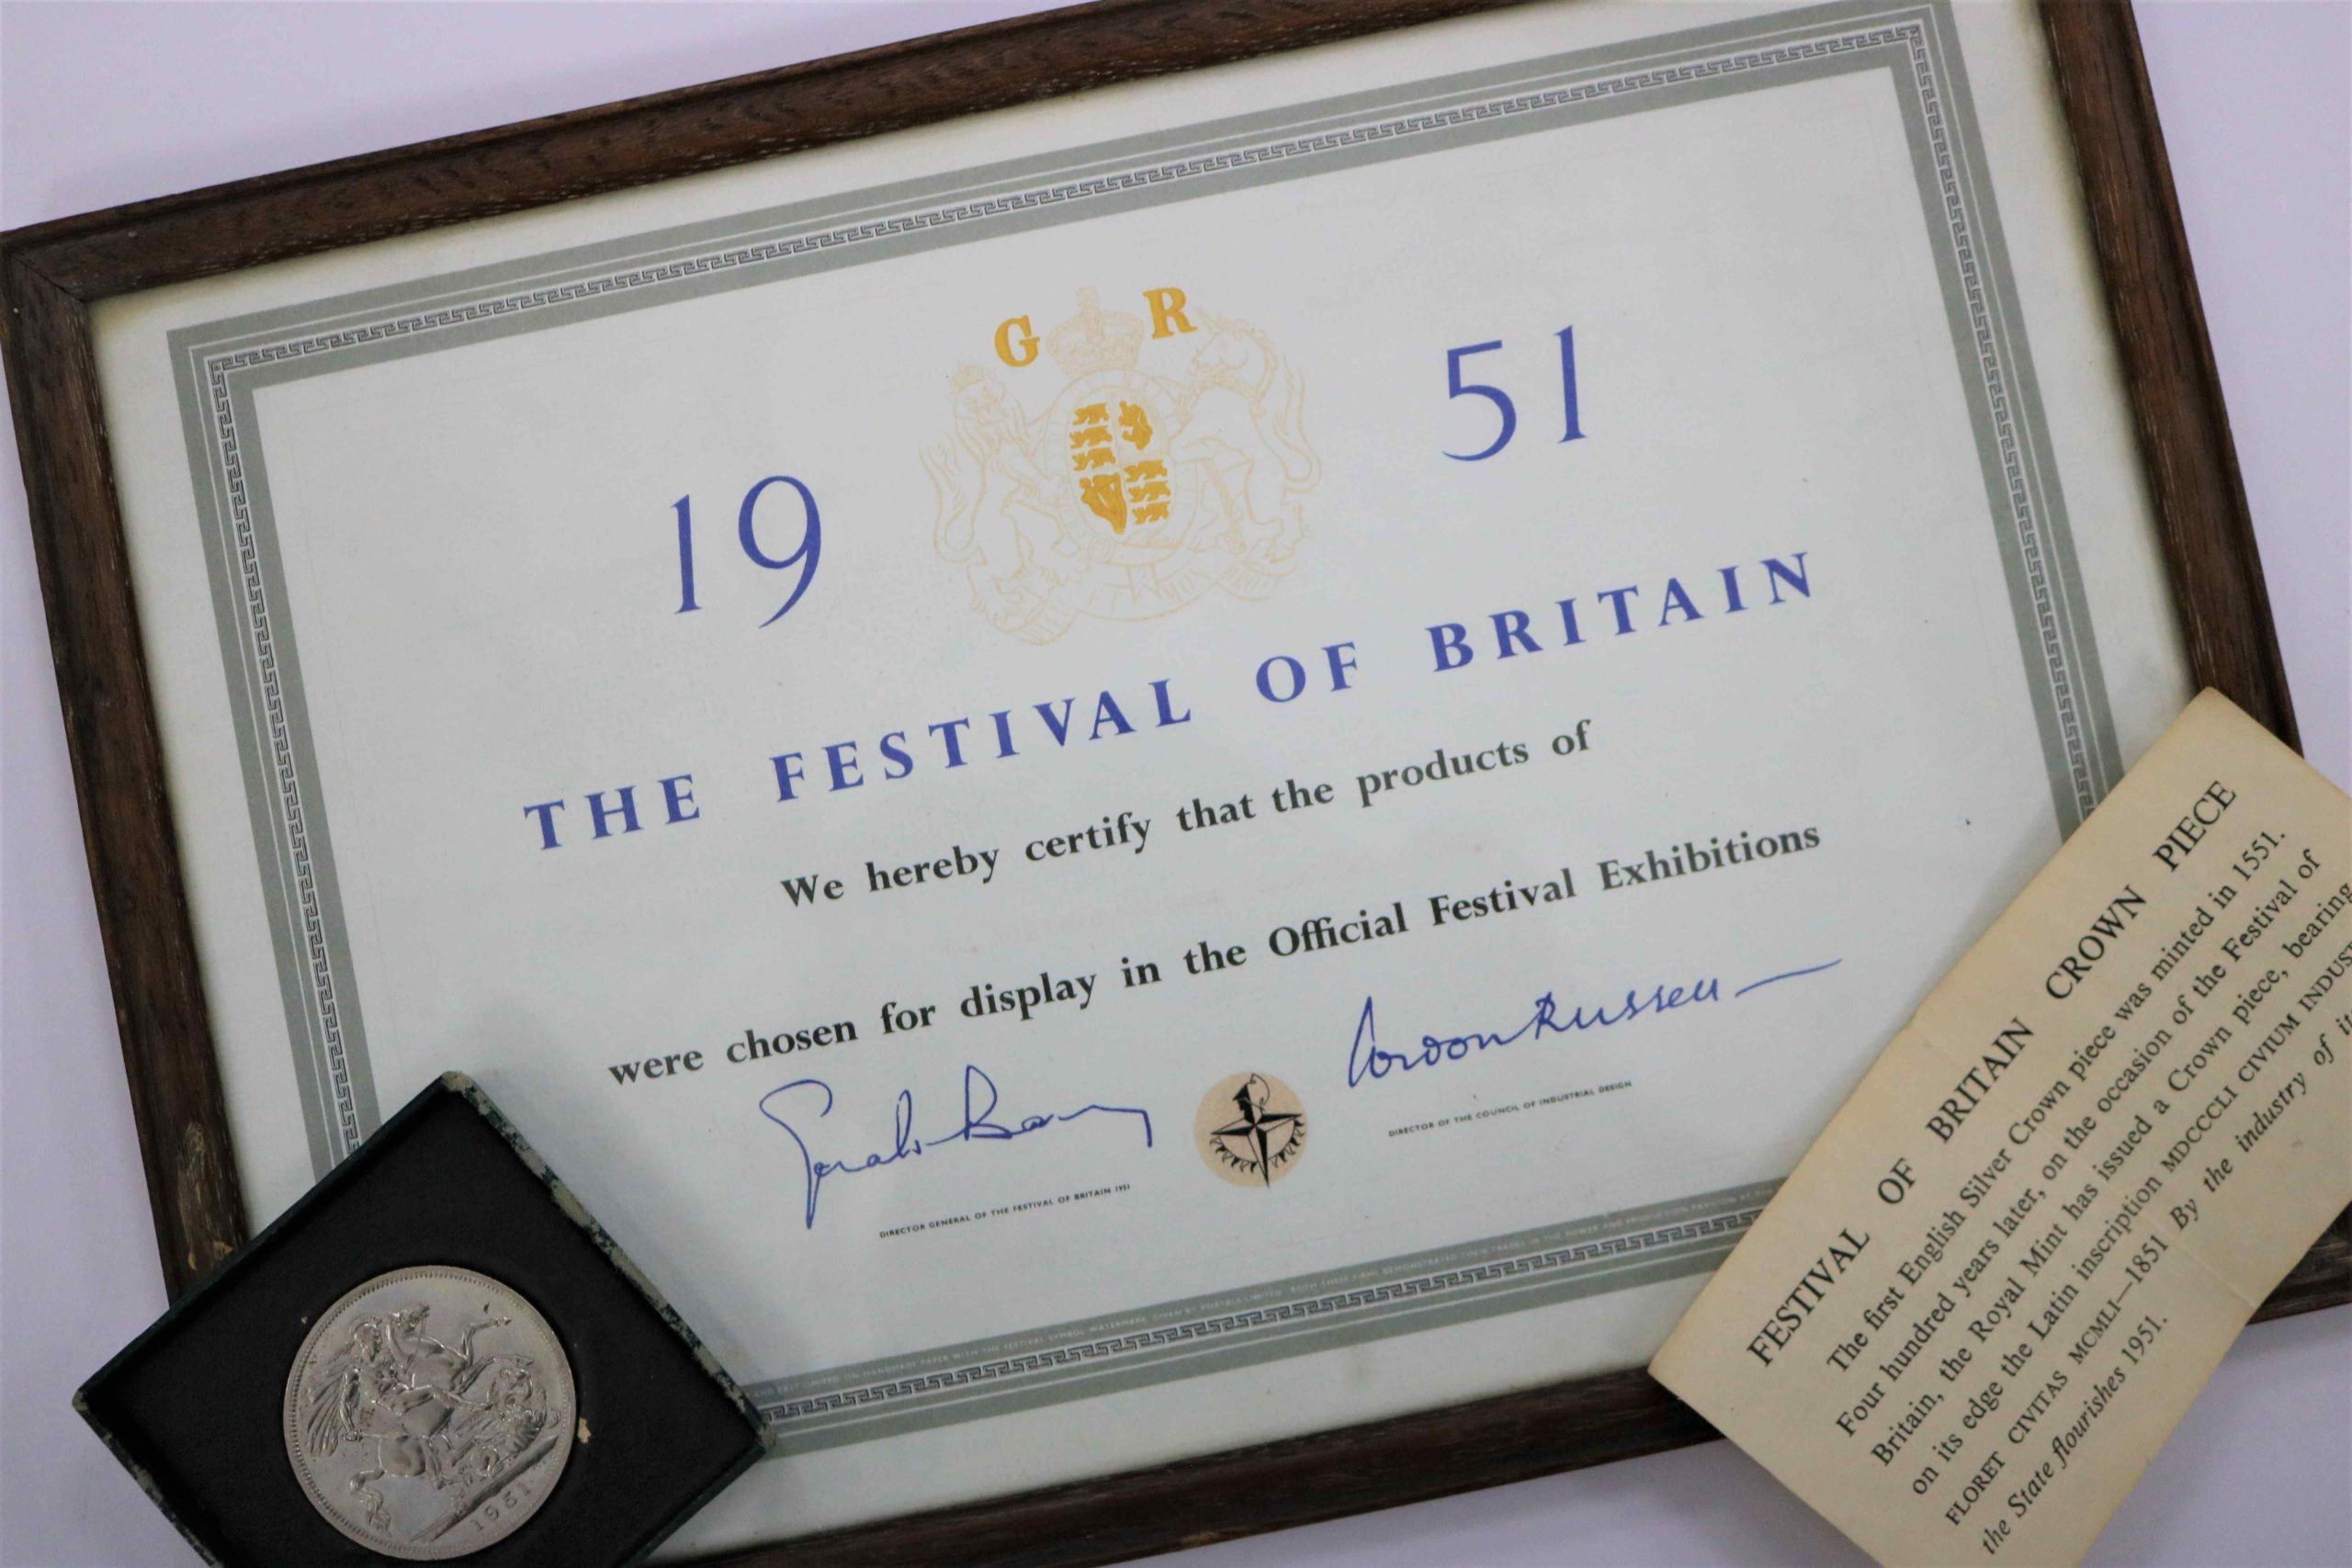 the certificate given at the Festival of Britain with the coin presented